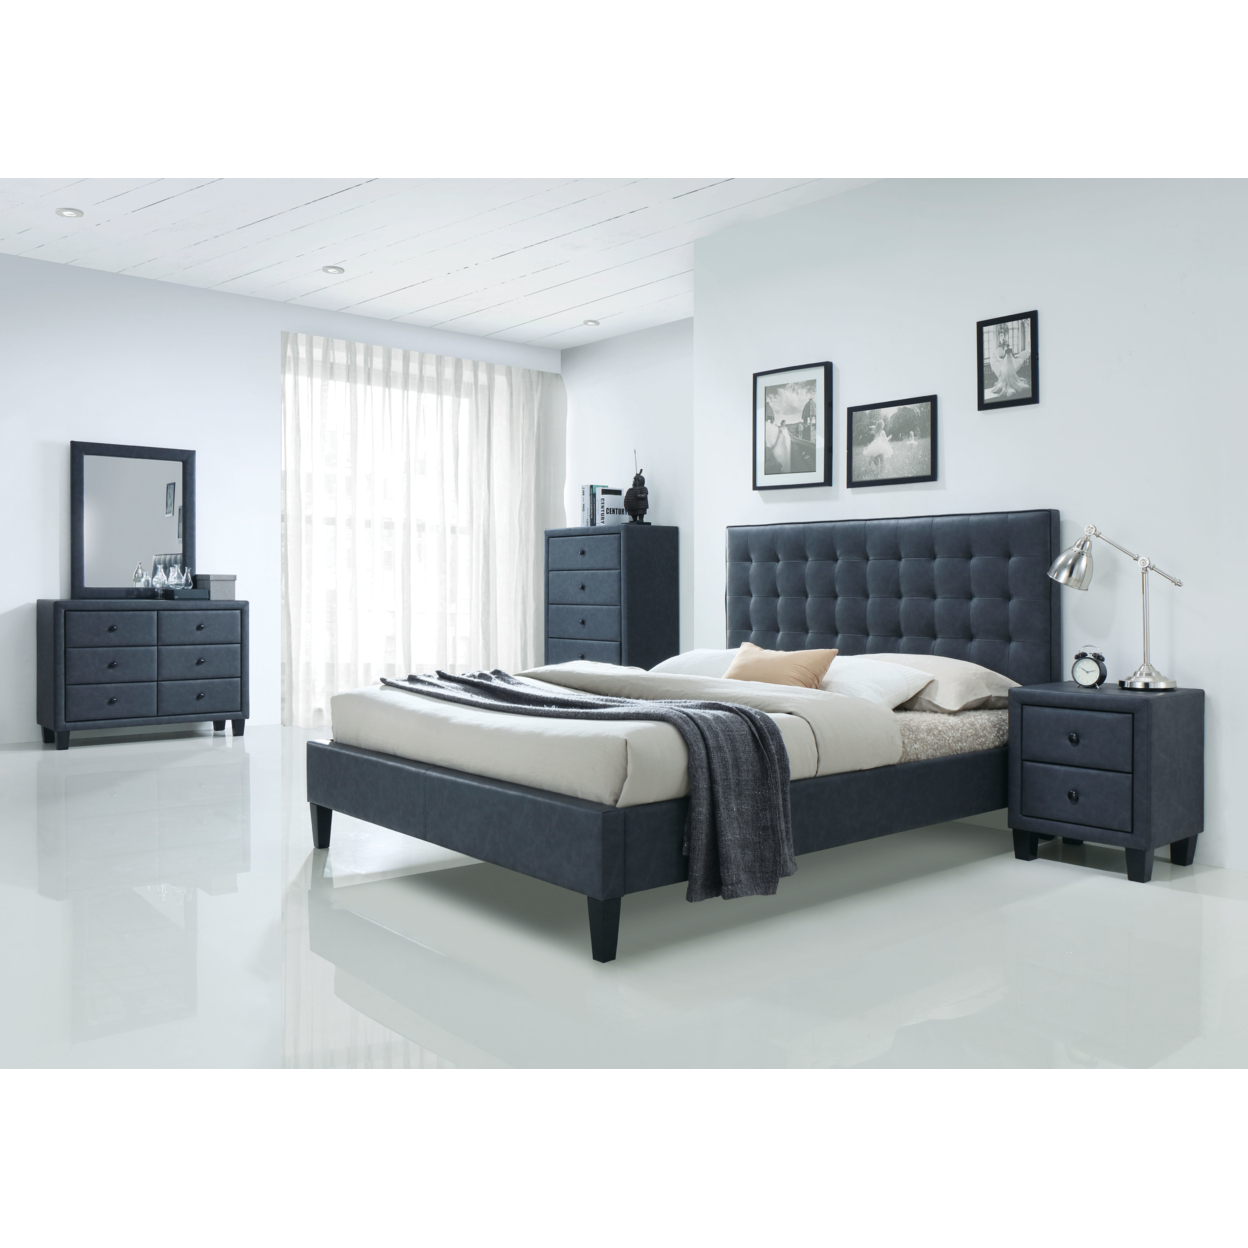 Luxurious And Stylish Fully Padded Queen Bed, Grey- Saltoro Sherpi